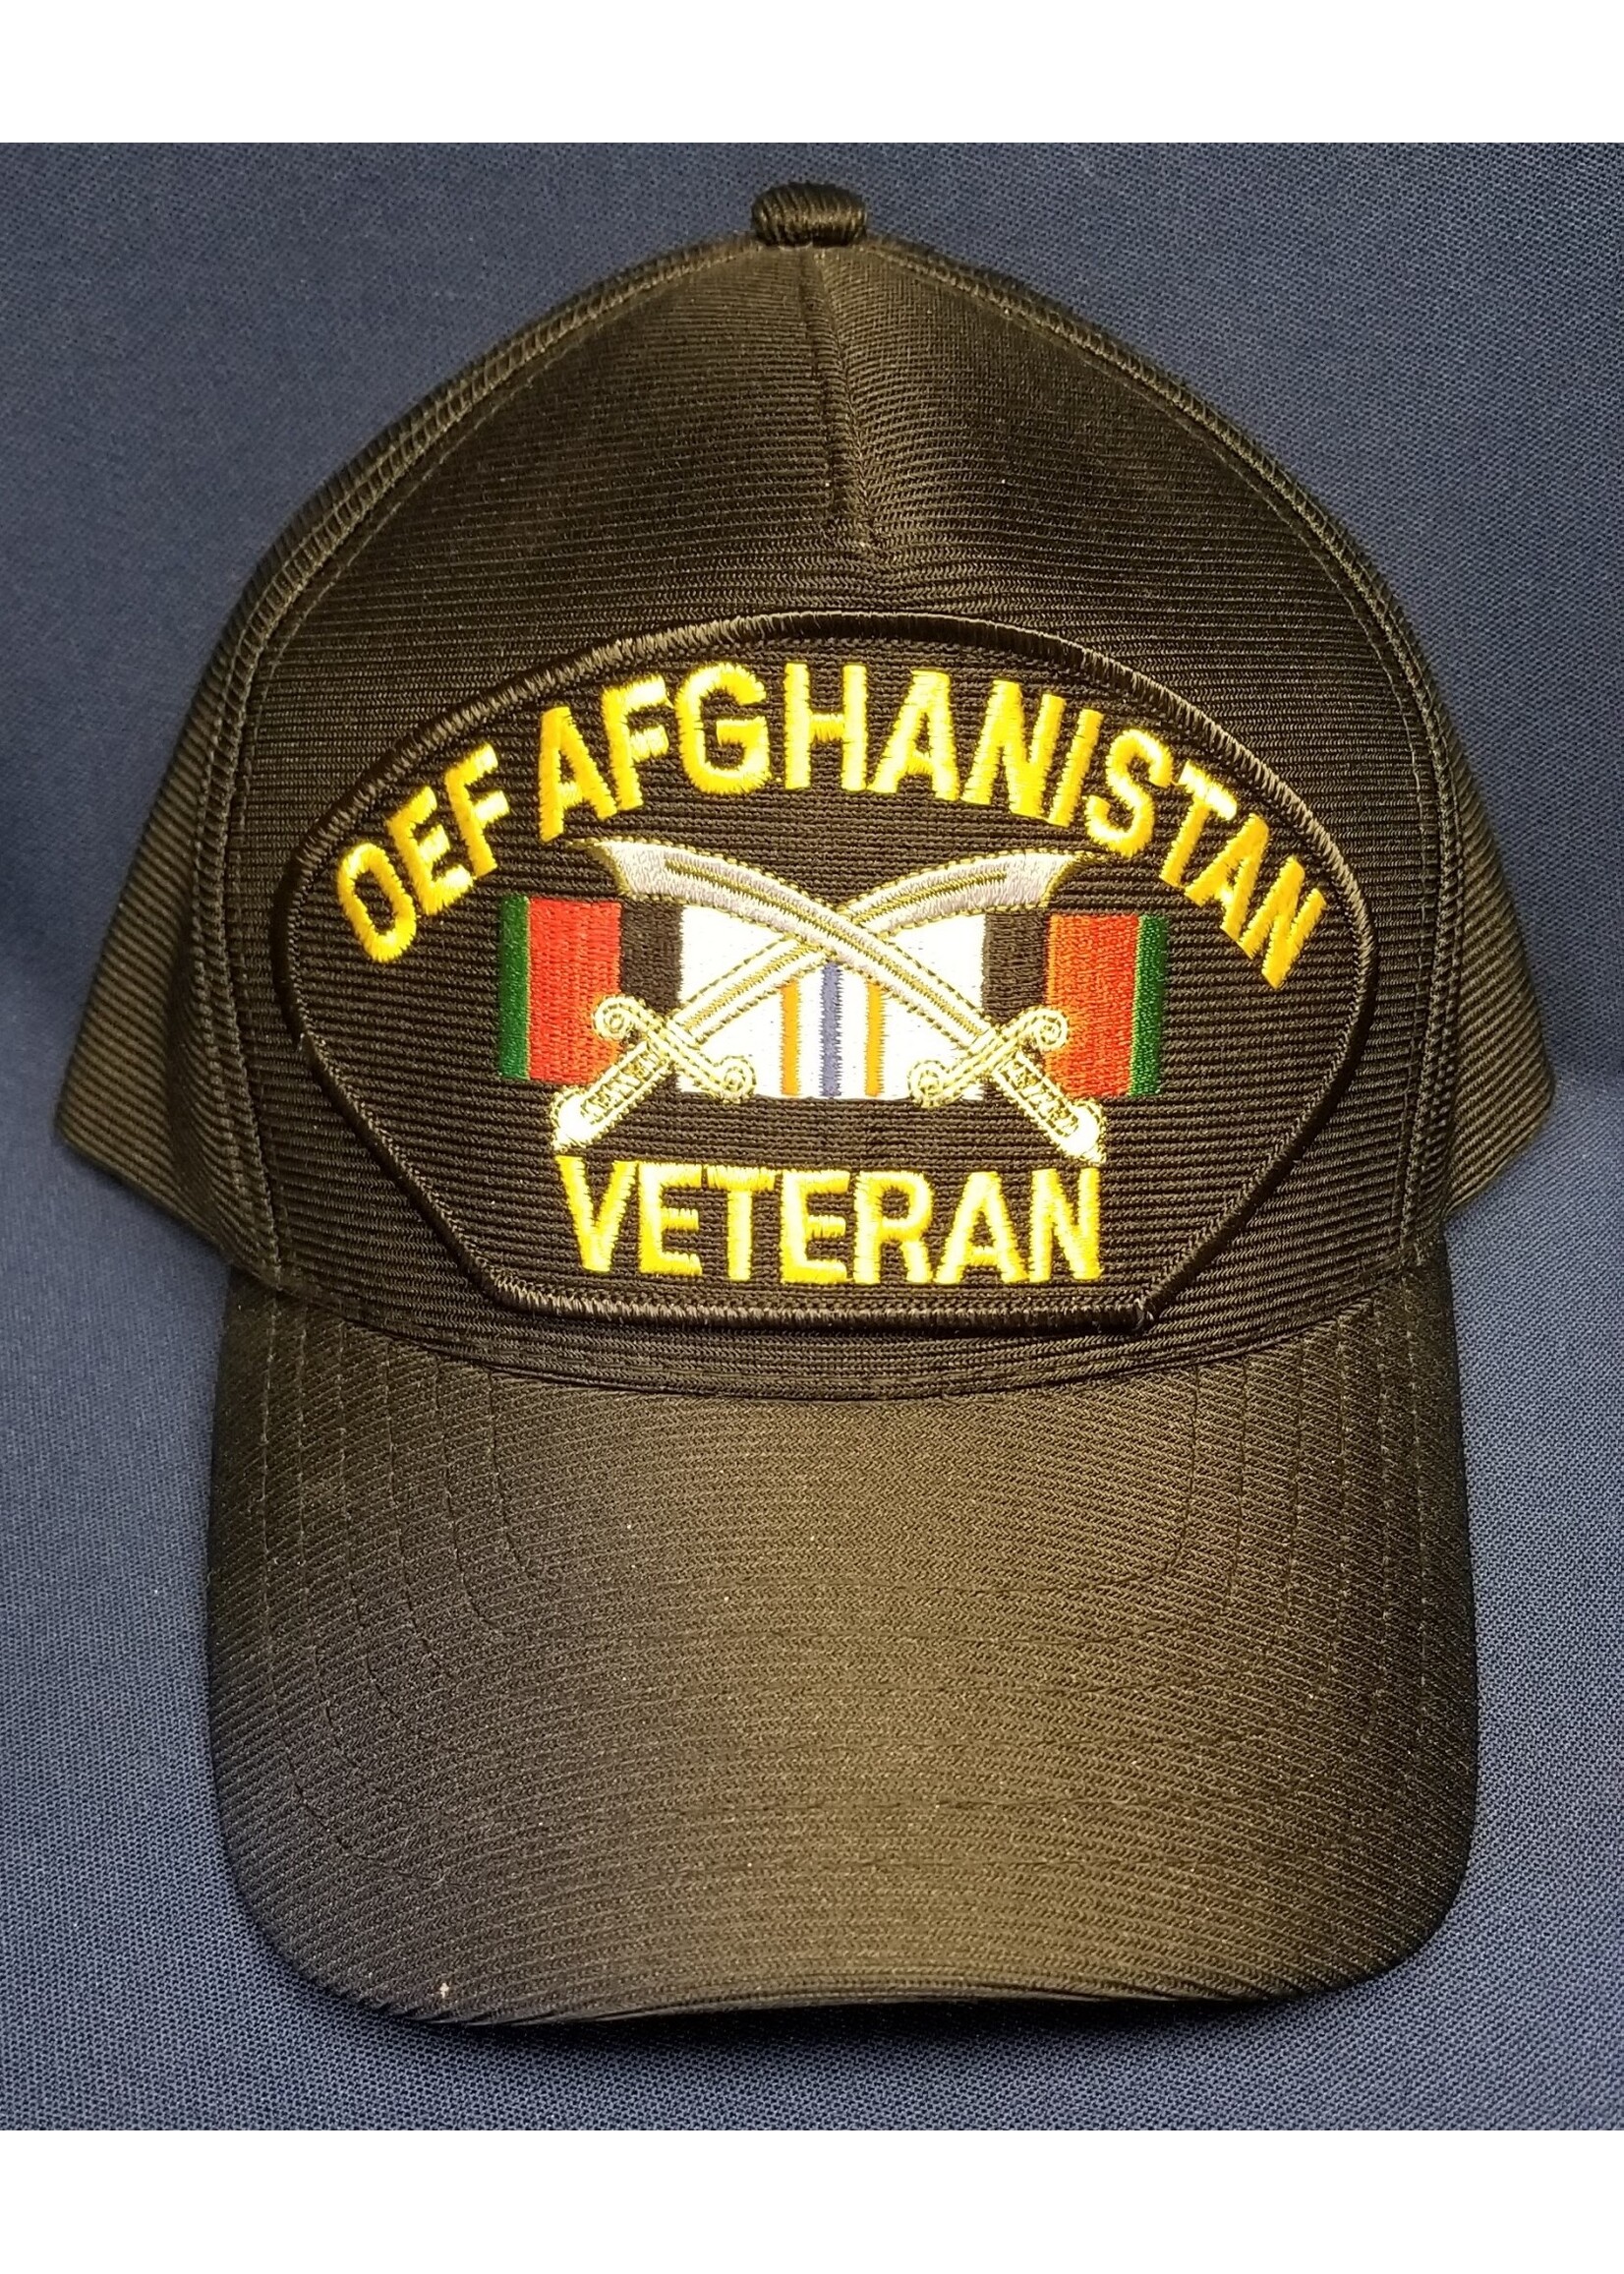 Eagle Crest Cap OEF Afghanistan Veteran with Ribbons & Swords